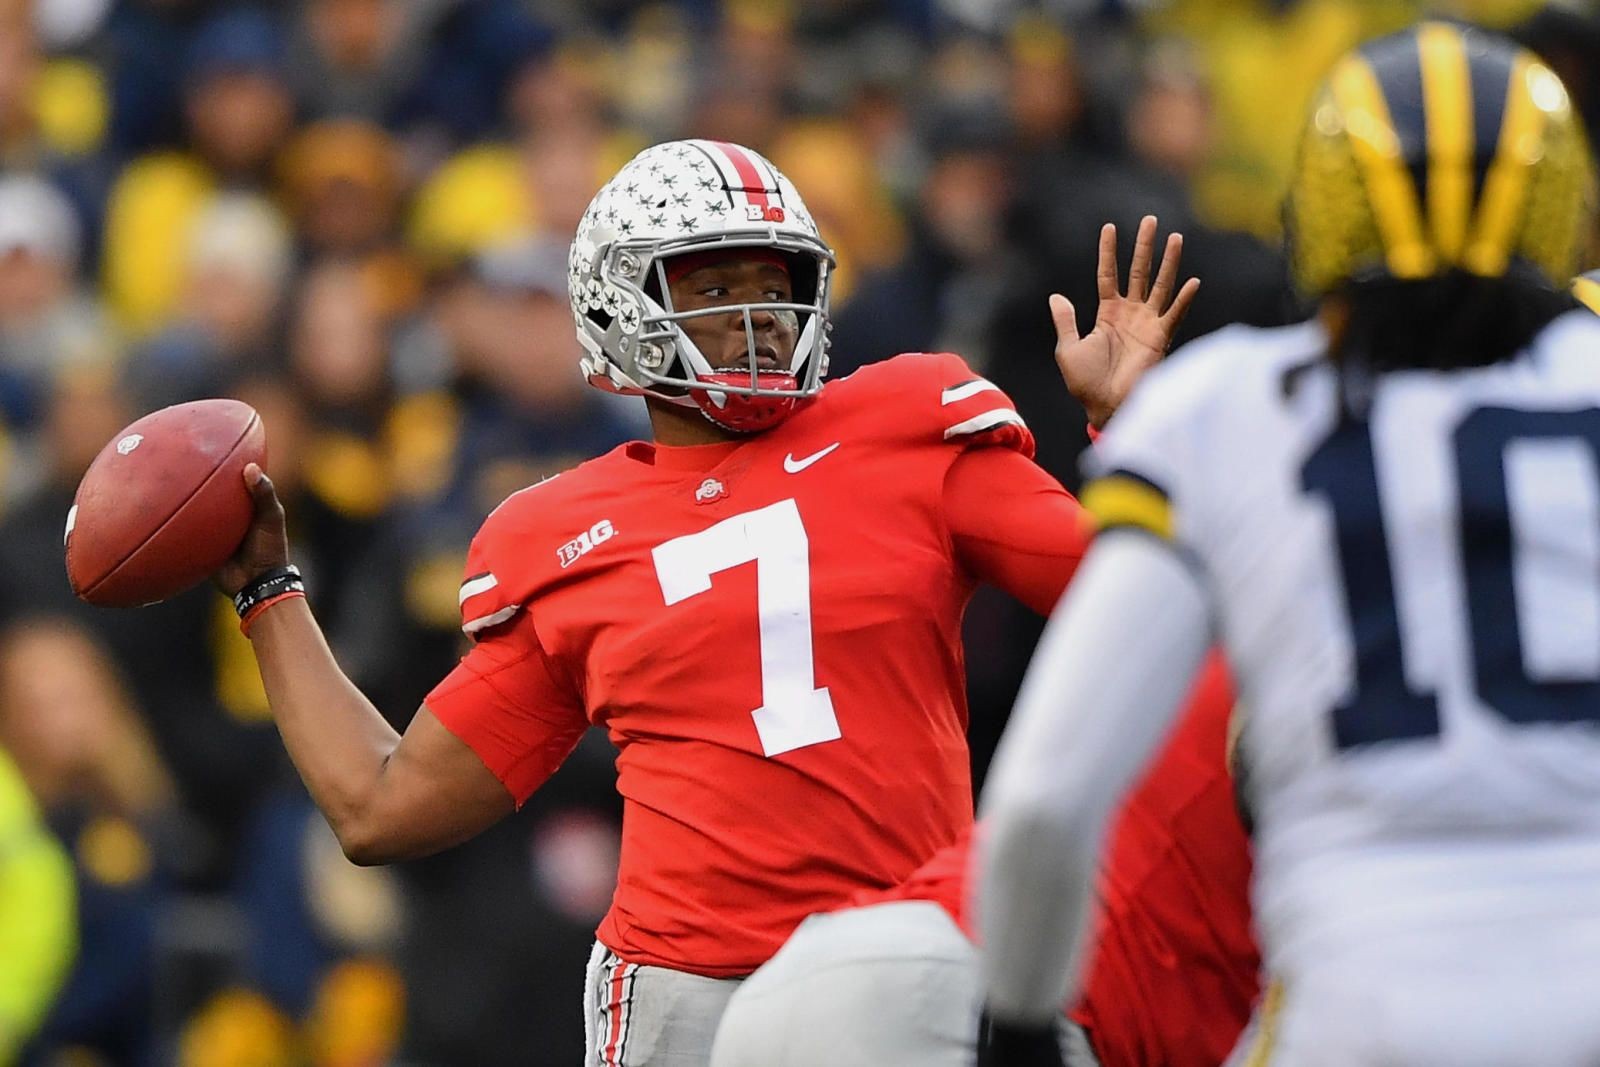 Ohio State vs. Washington Early Rose Bowl preview